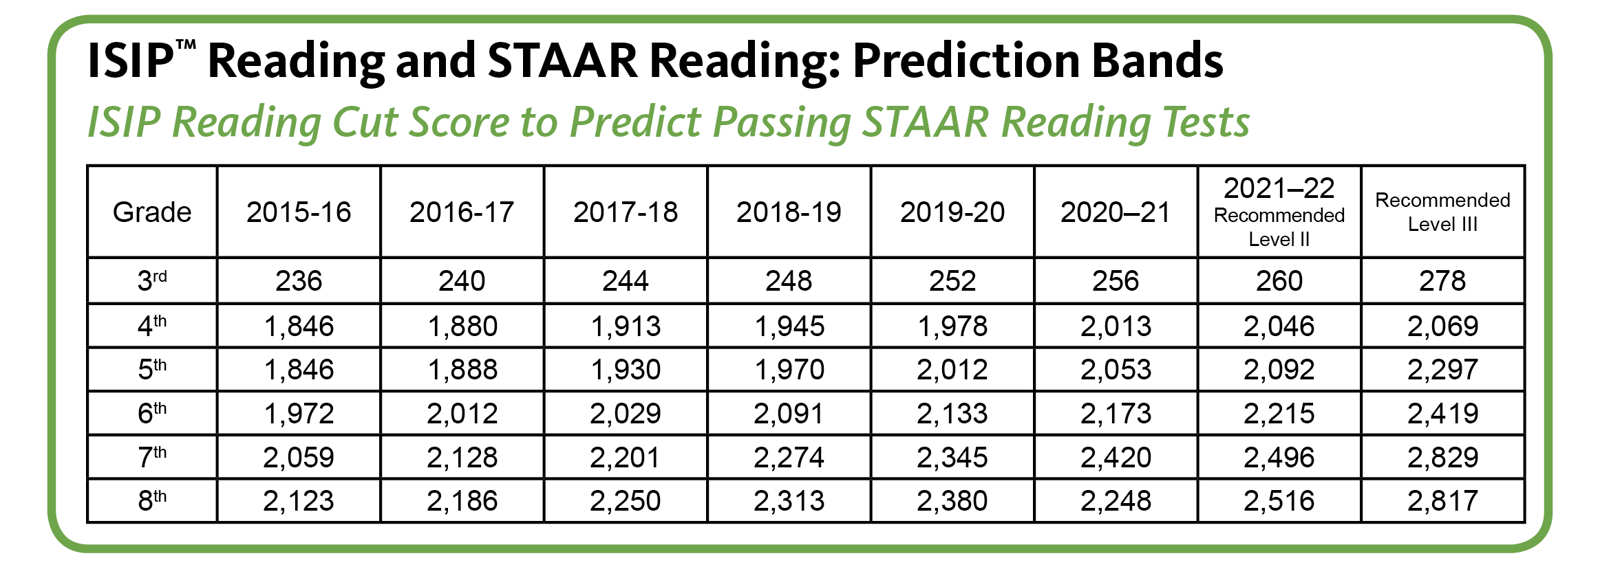 isip-assessments-predict-passage-of-staar-test-with-95-confidence